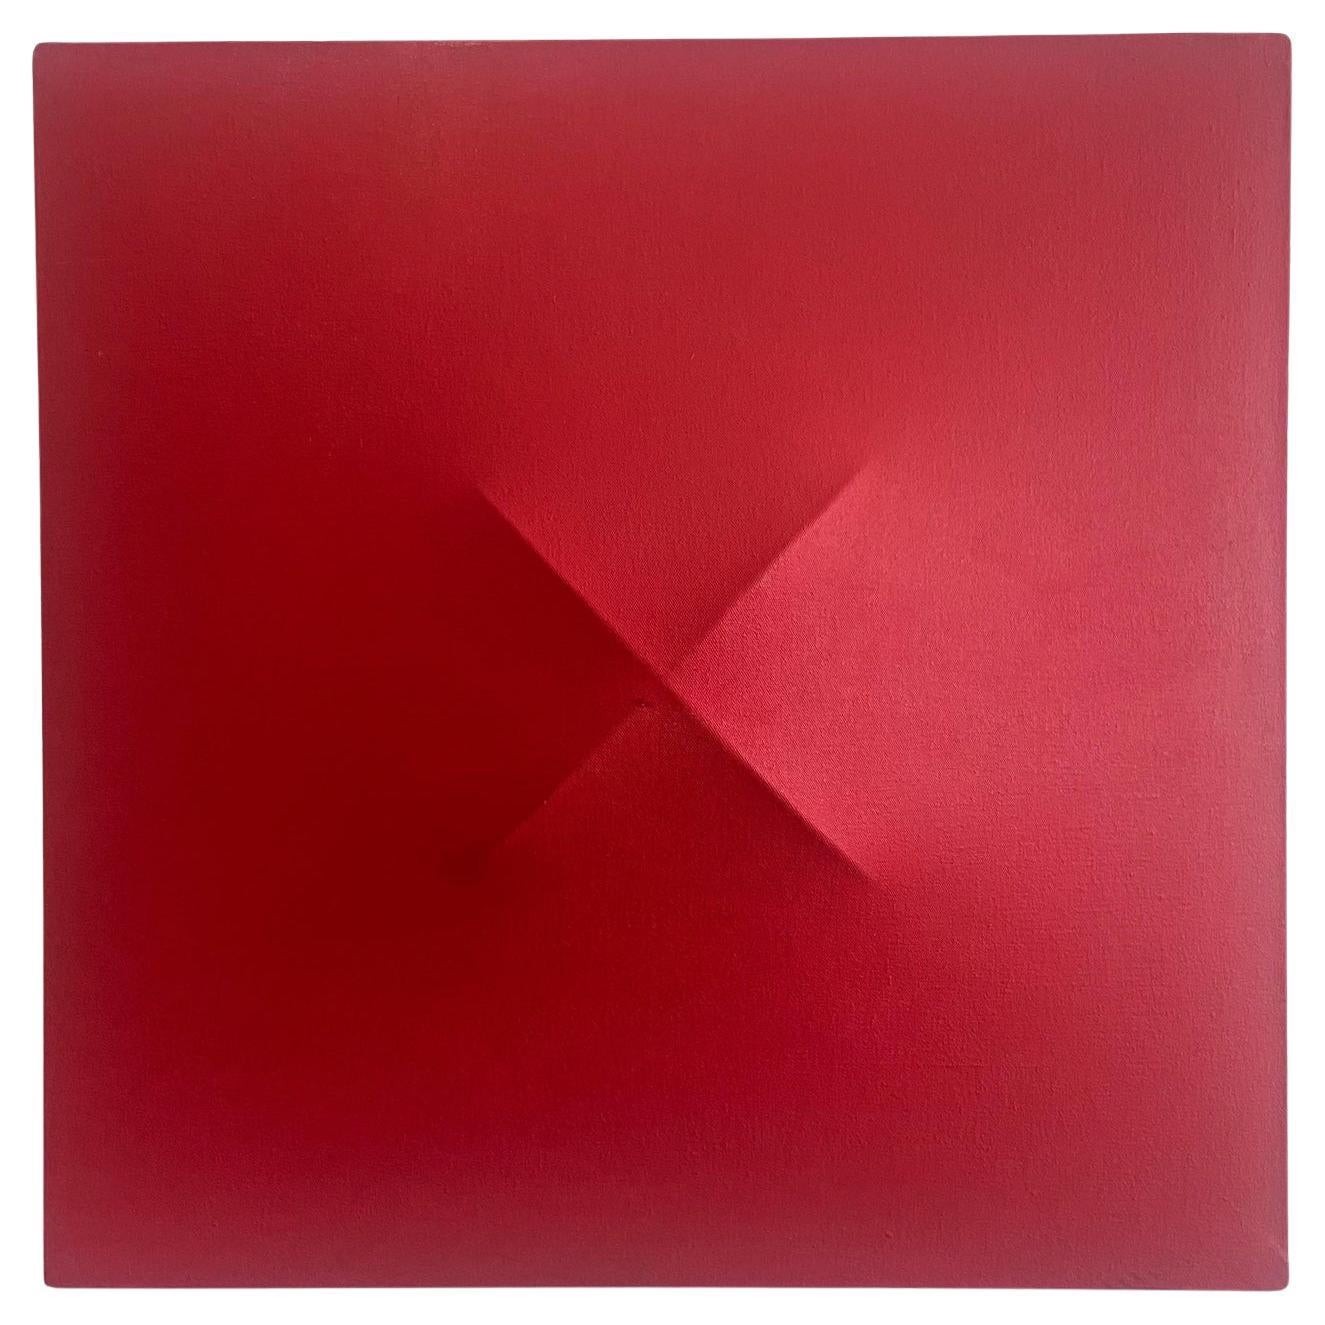 Tom Scmitt 1968 Shaped Canvas 3 Dimensional Acrylic on Canvas in Red For Sale